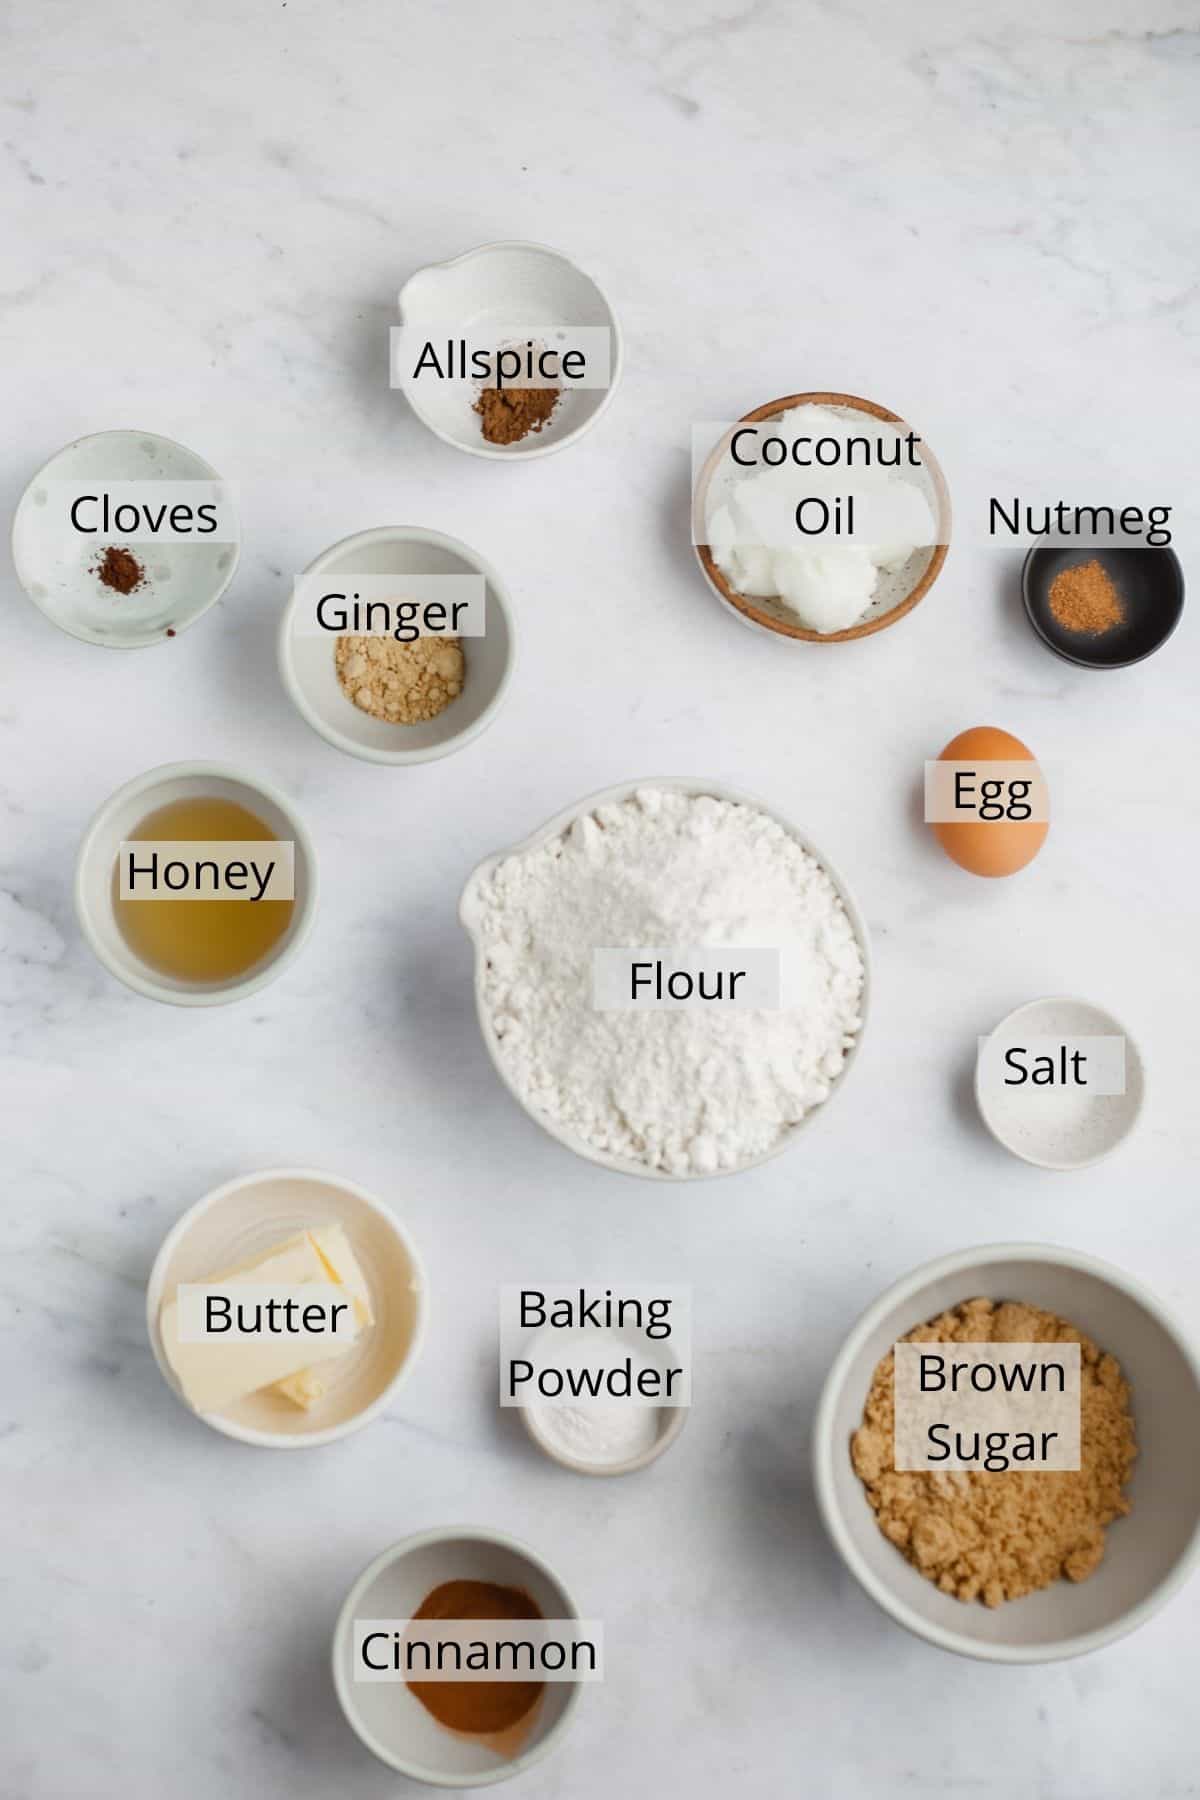 all the ingredients needed for gingerbread cookies without molasses weighed out in small bowls.